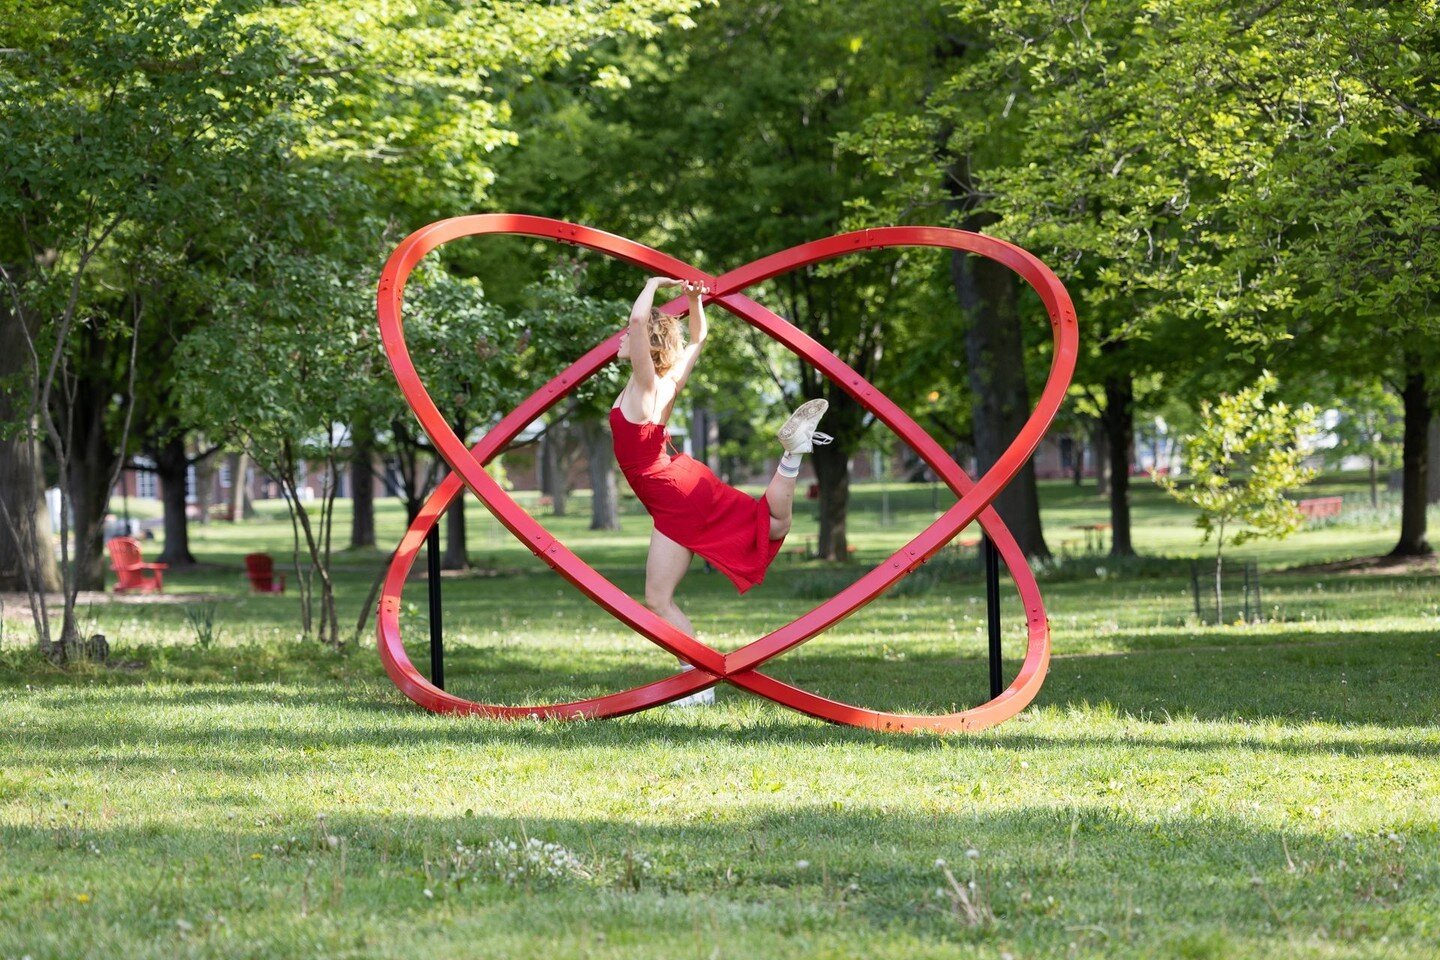 West Harlem Art Fund, NYU Wetlab and NY Artist Equity Association are presenting dancer Salma Kiuhan for a one-day performance in Nolan Park on Governors Island, May 13, 2023.

Salma Kiuhan is a South Florida native, graduating from A.W. Dreyfoos Sch